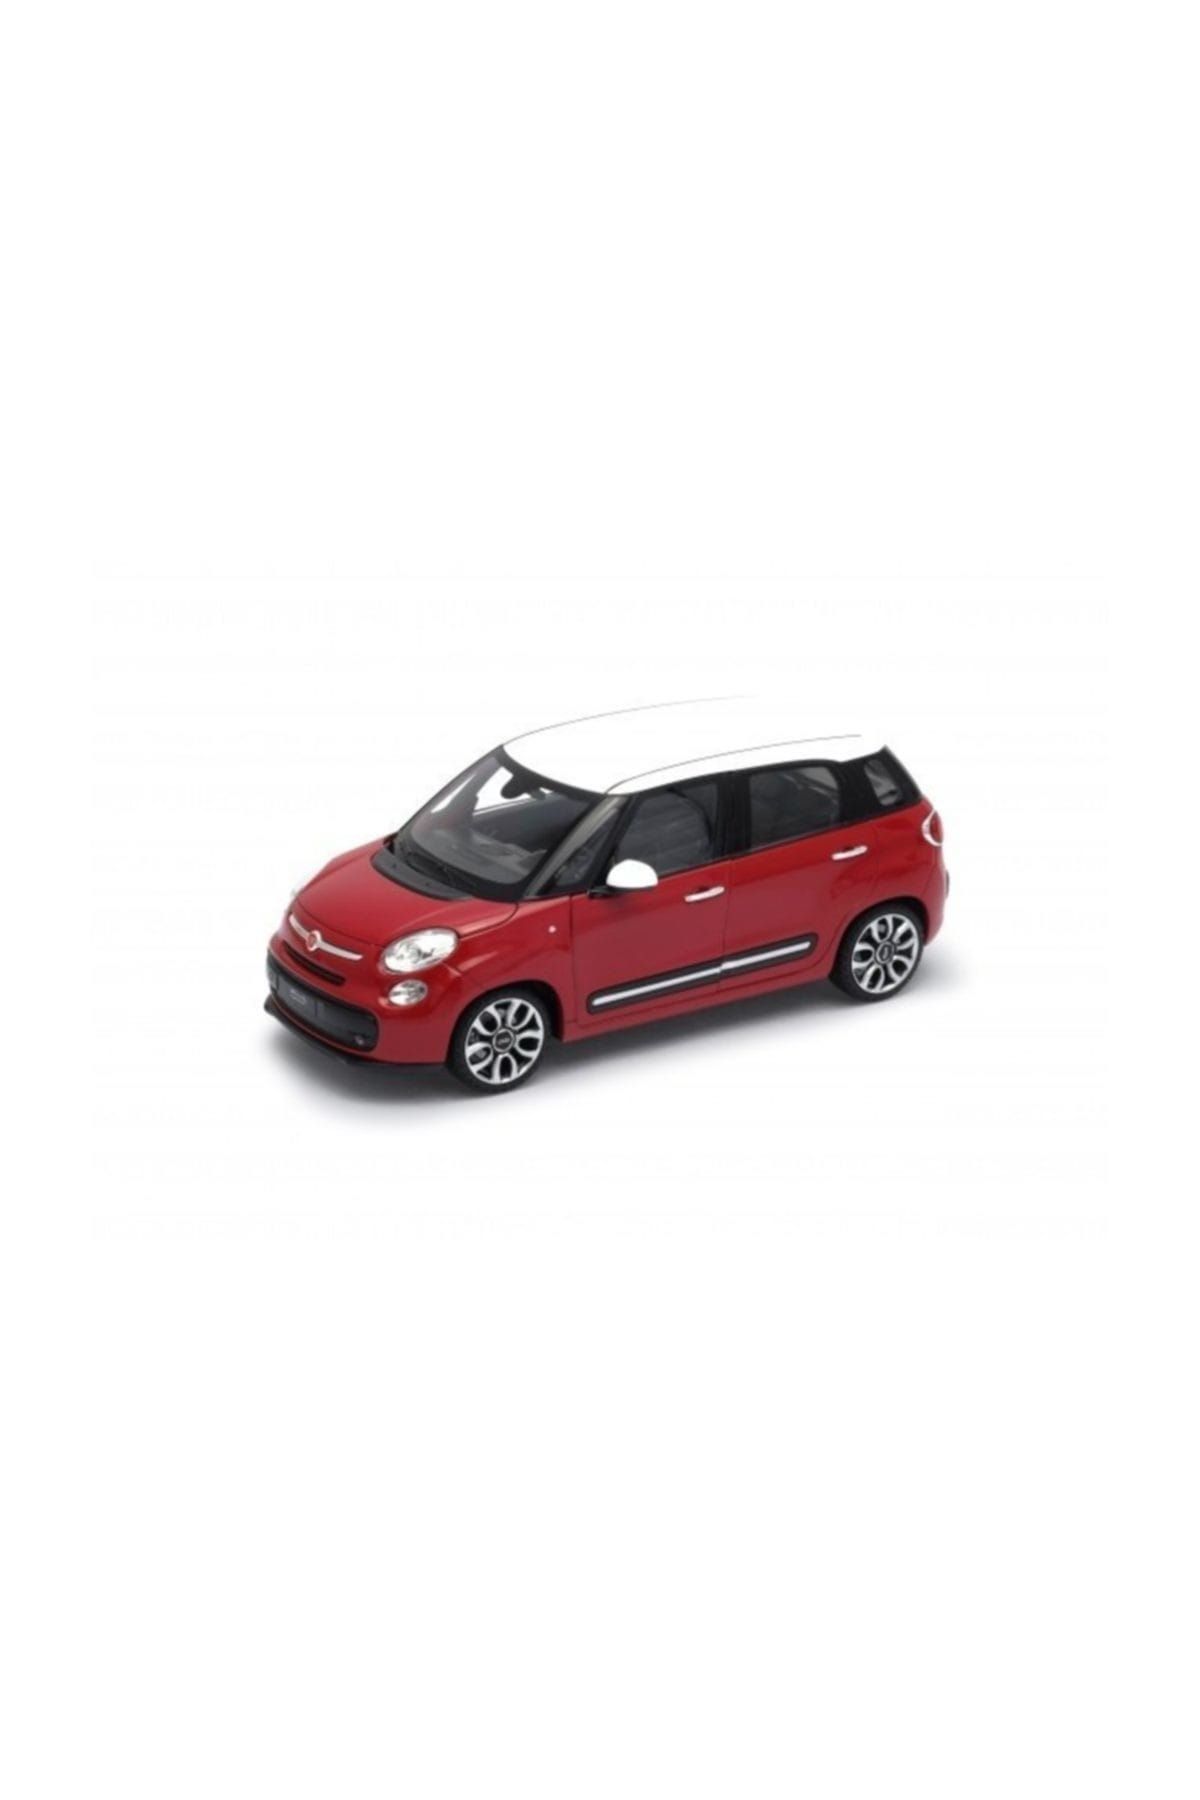 WELLY 24038 1/24 2013 Fiat 500l